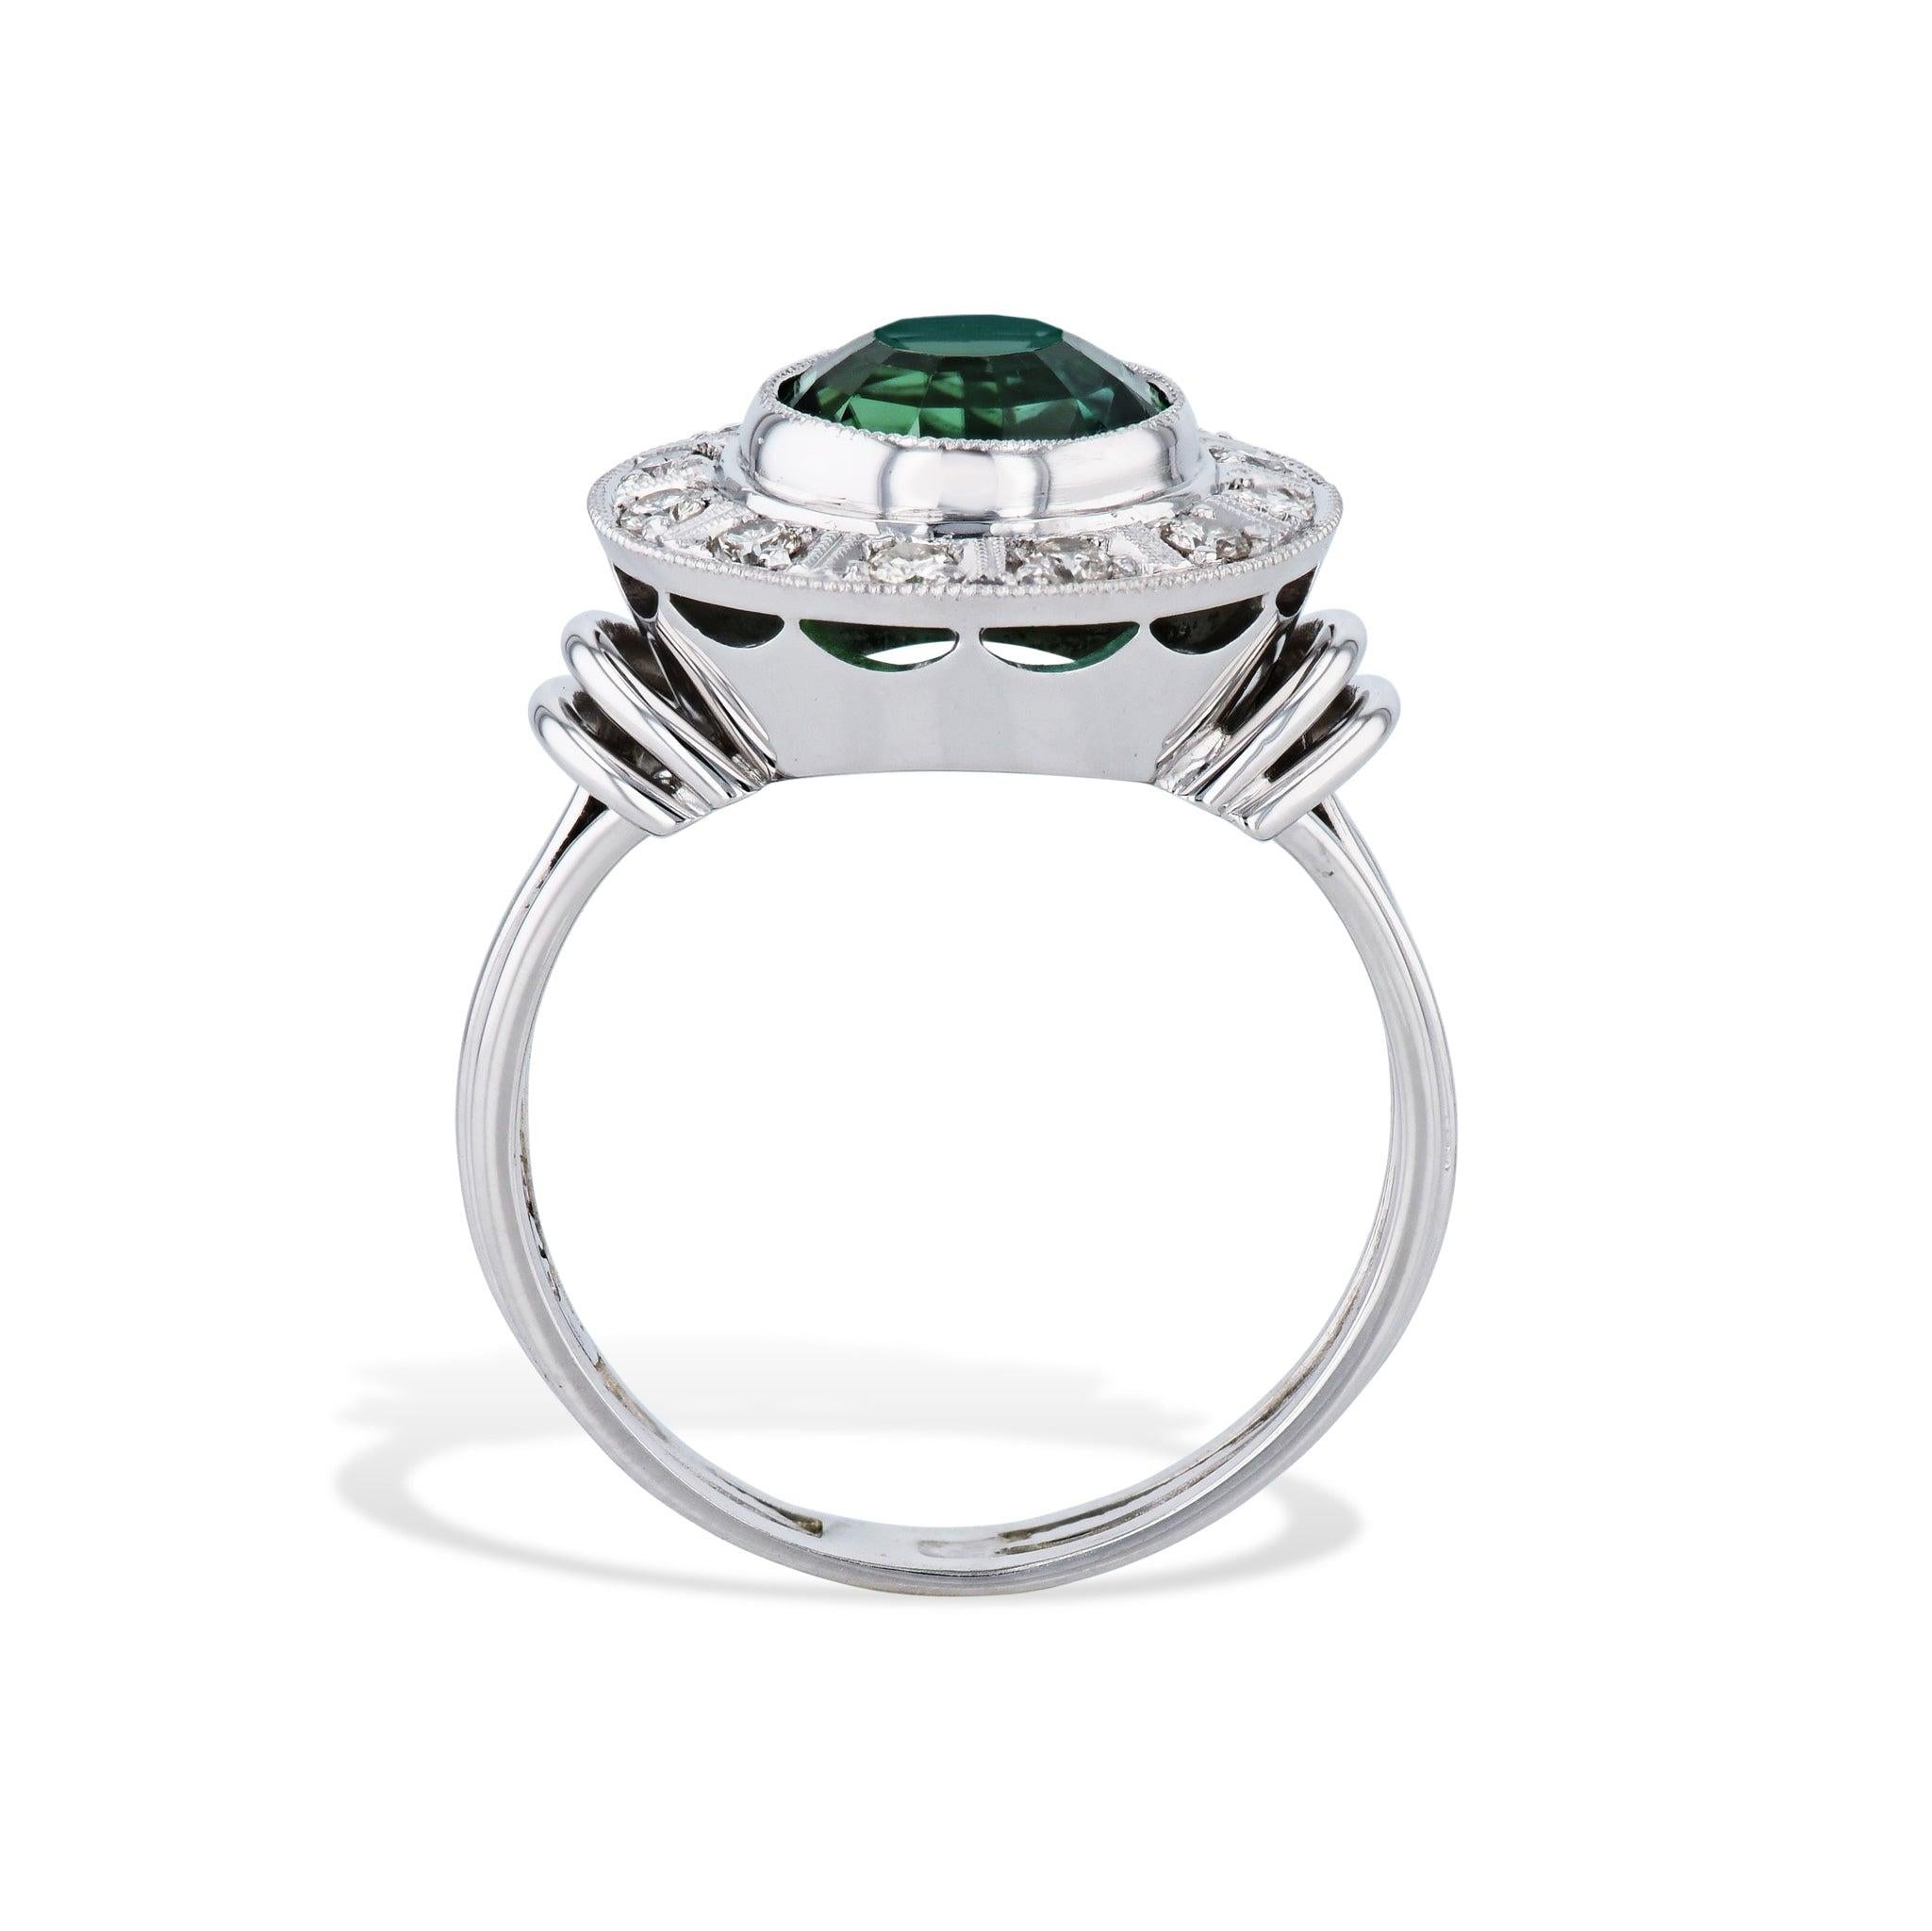 Enchant your look with this gorgeous 18kt. white gold Green Tourmaline Milgraine Diamond Estate Ring! Boasting an 8mm center Green Tourmaline framed by 12 round cut diamonds in a Milgraine setting. this luxurious size 7.25 ring will make every